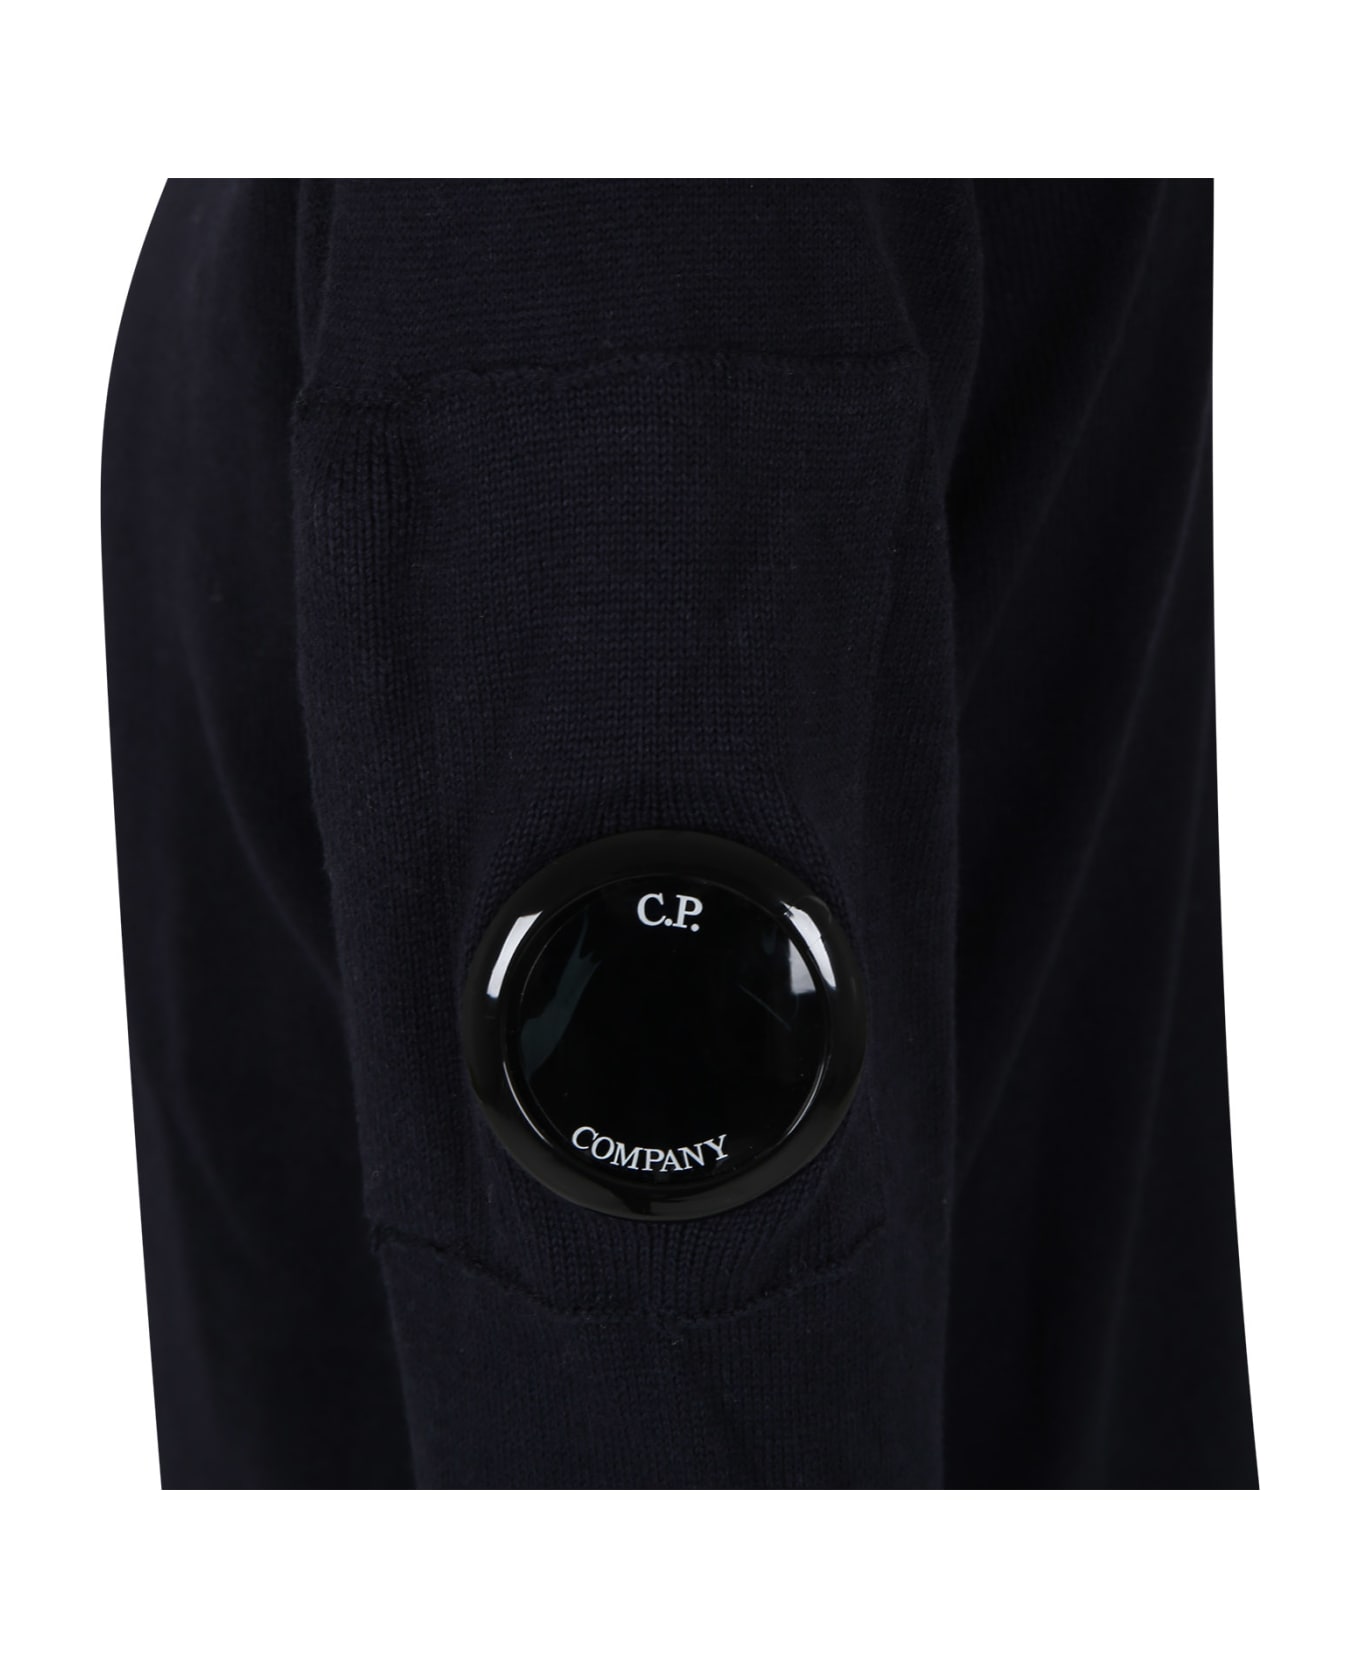 C.P. Company Undersixteen Blue Sweater For Boy With C.p. Company Lens - Blue